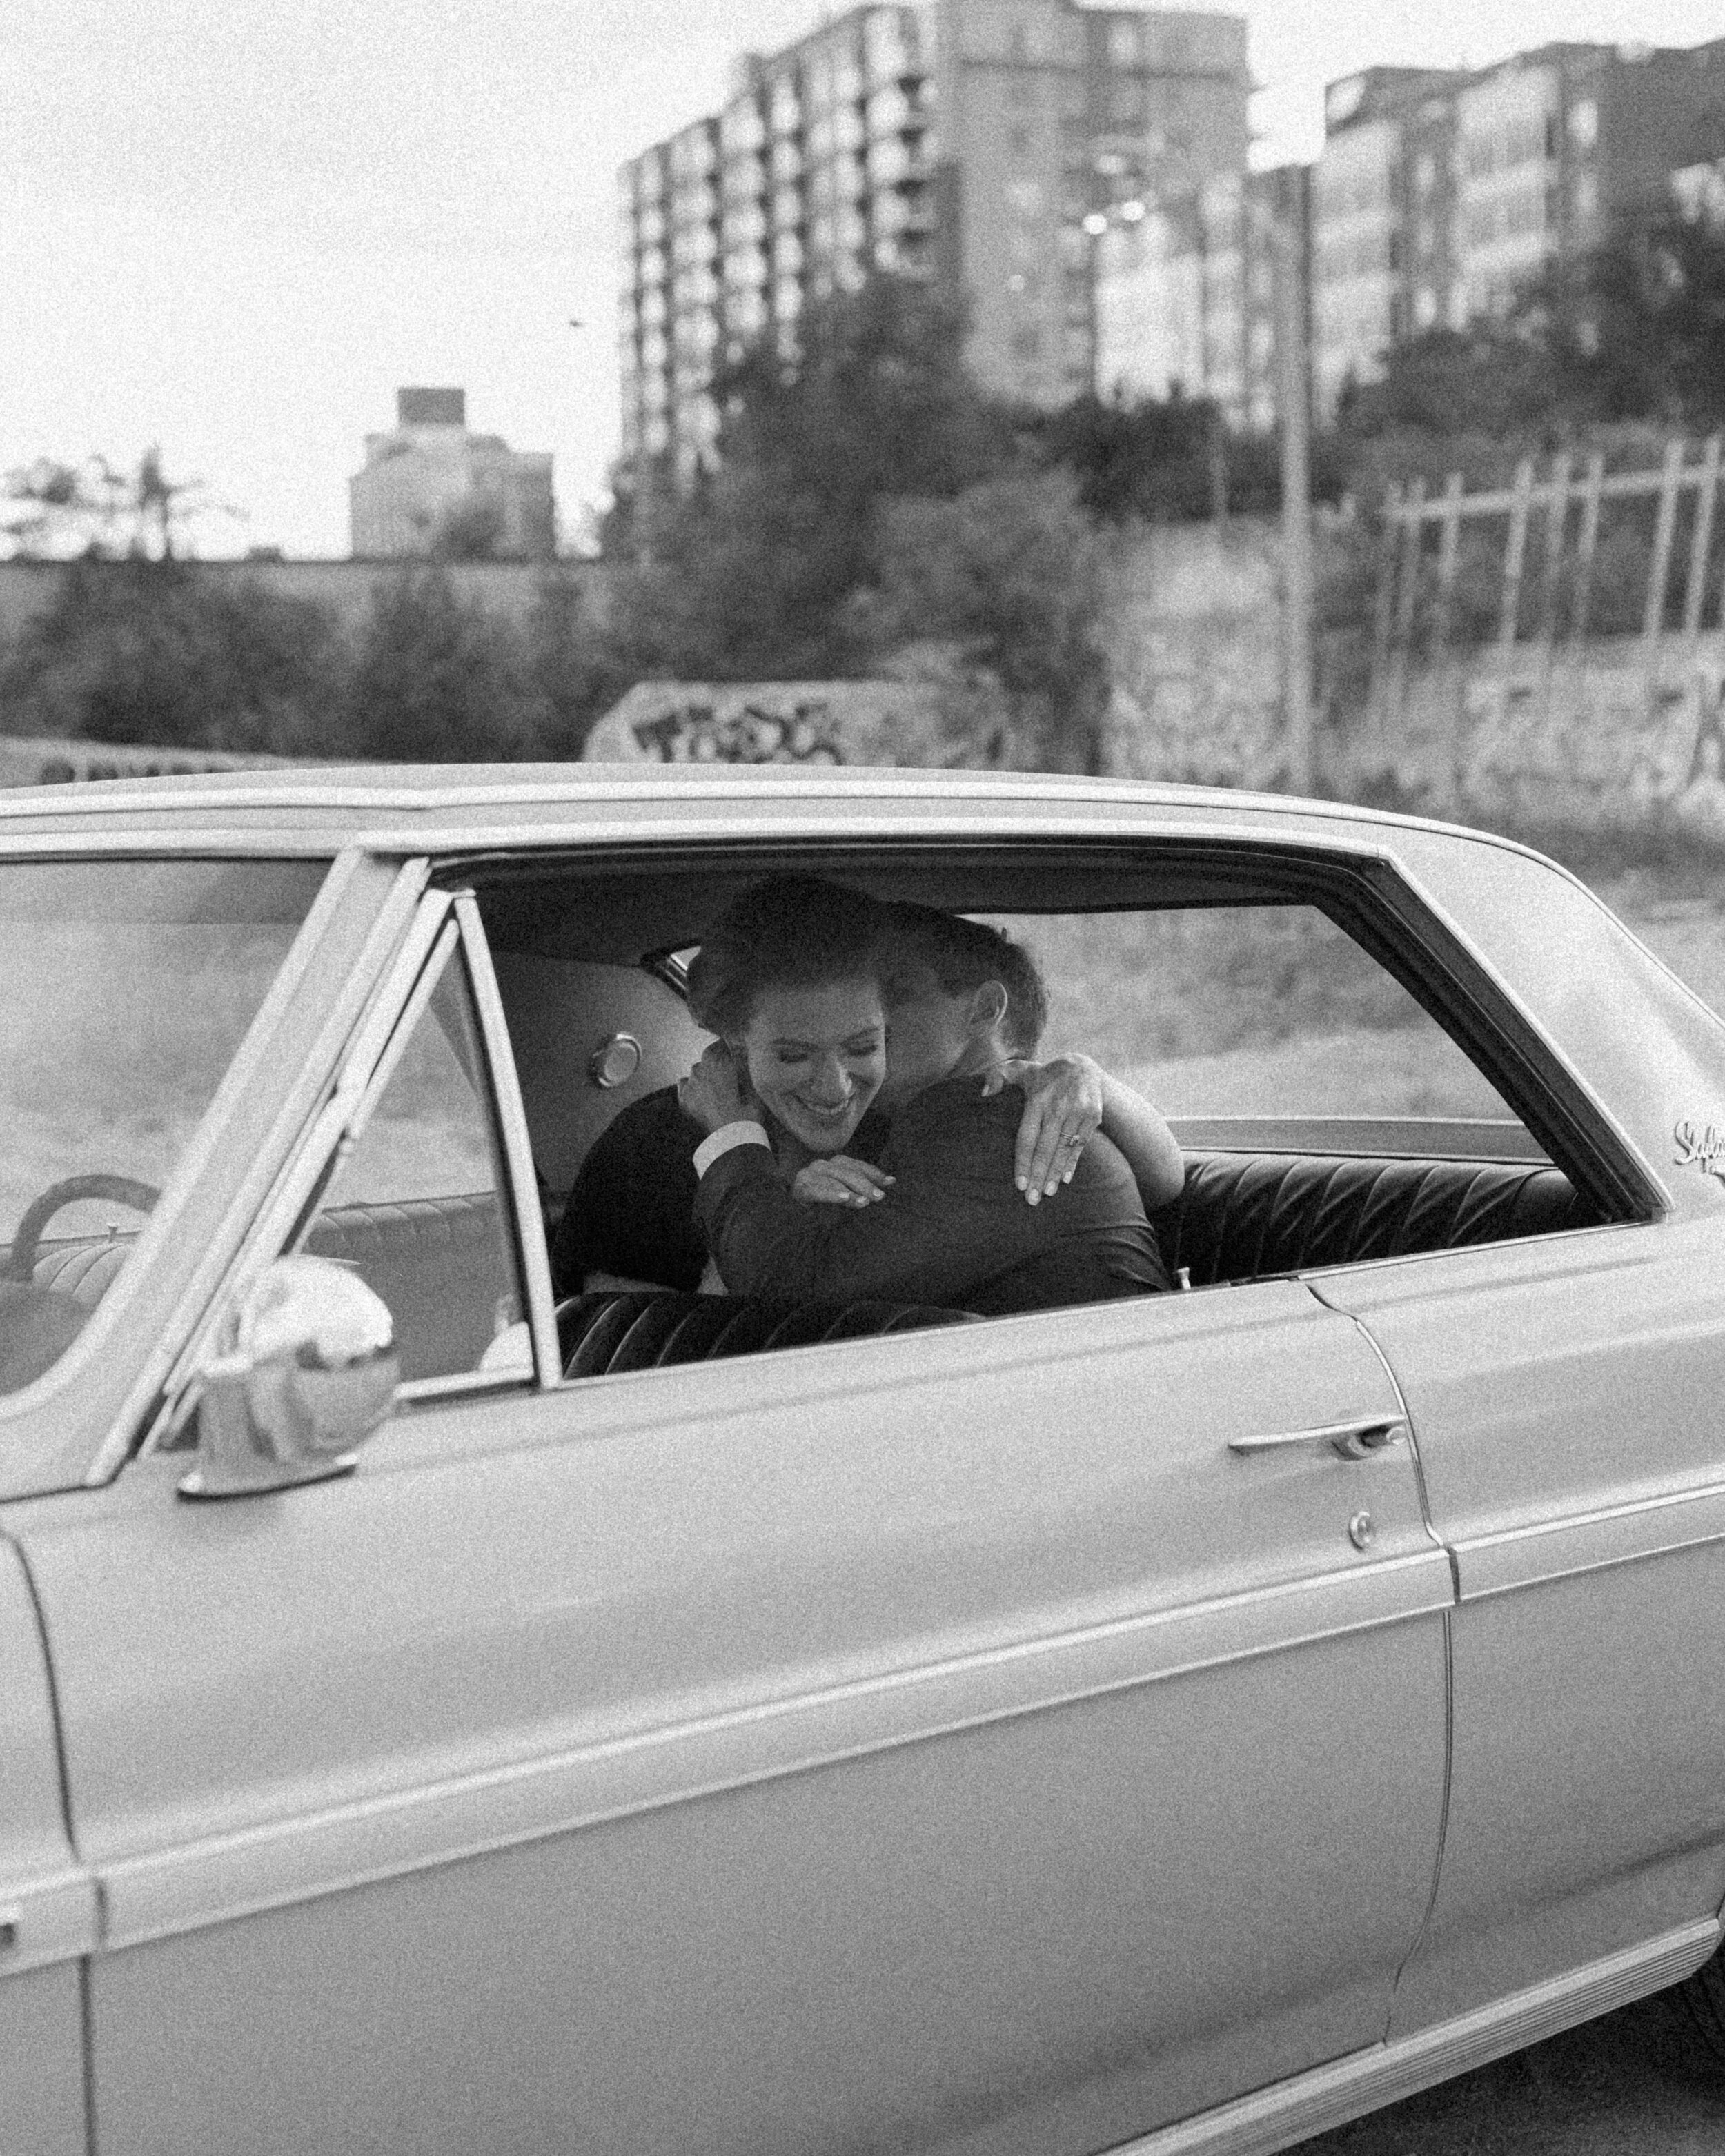 A couple kisses in a car in an urban area of Toronto.